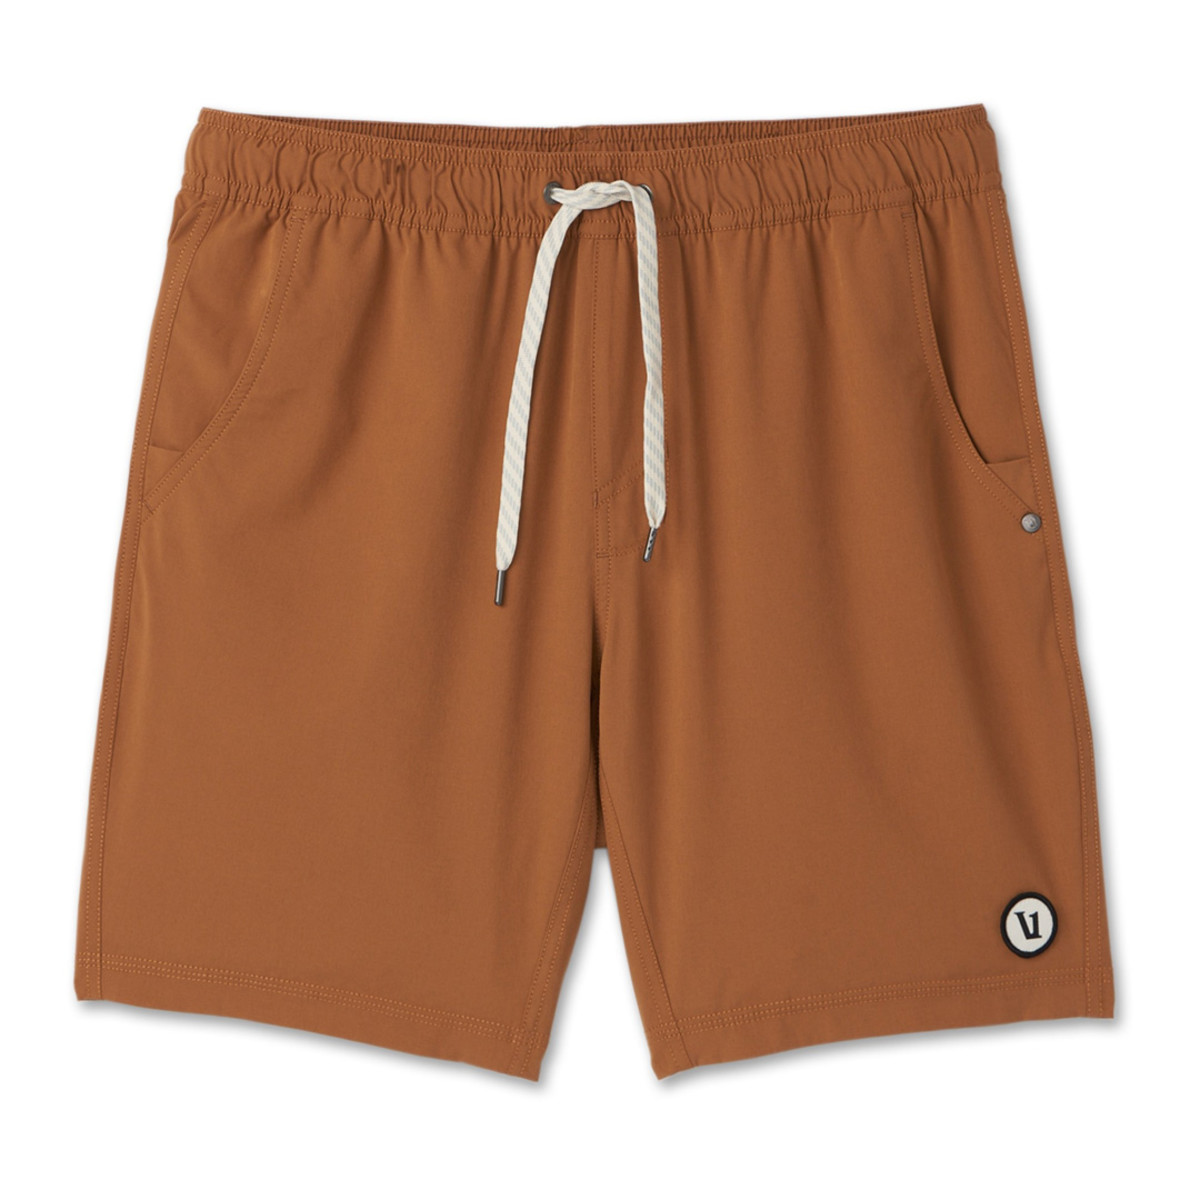 Vuori Kore Shorts Are Now on Rare Sale For $54 at REI - Men's Journal